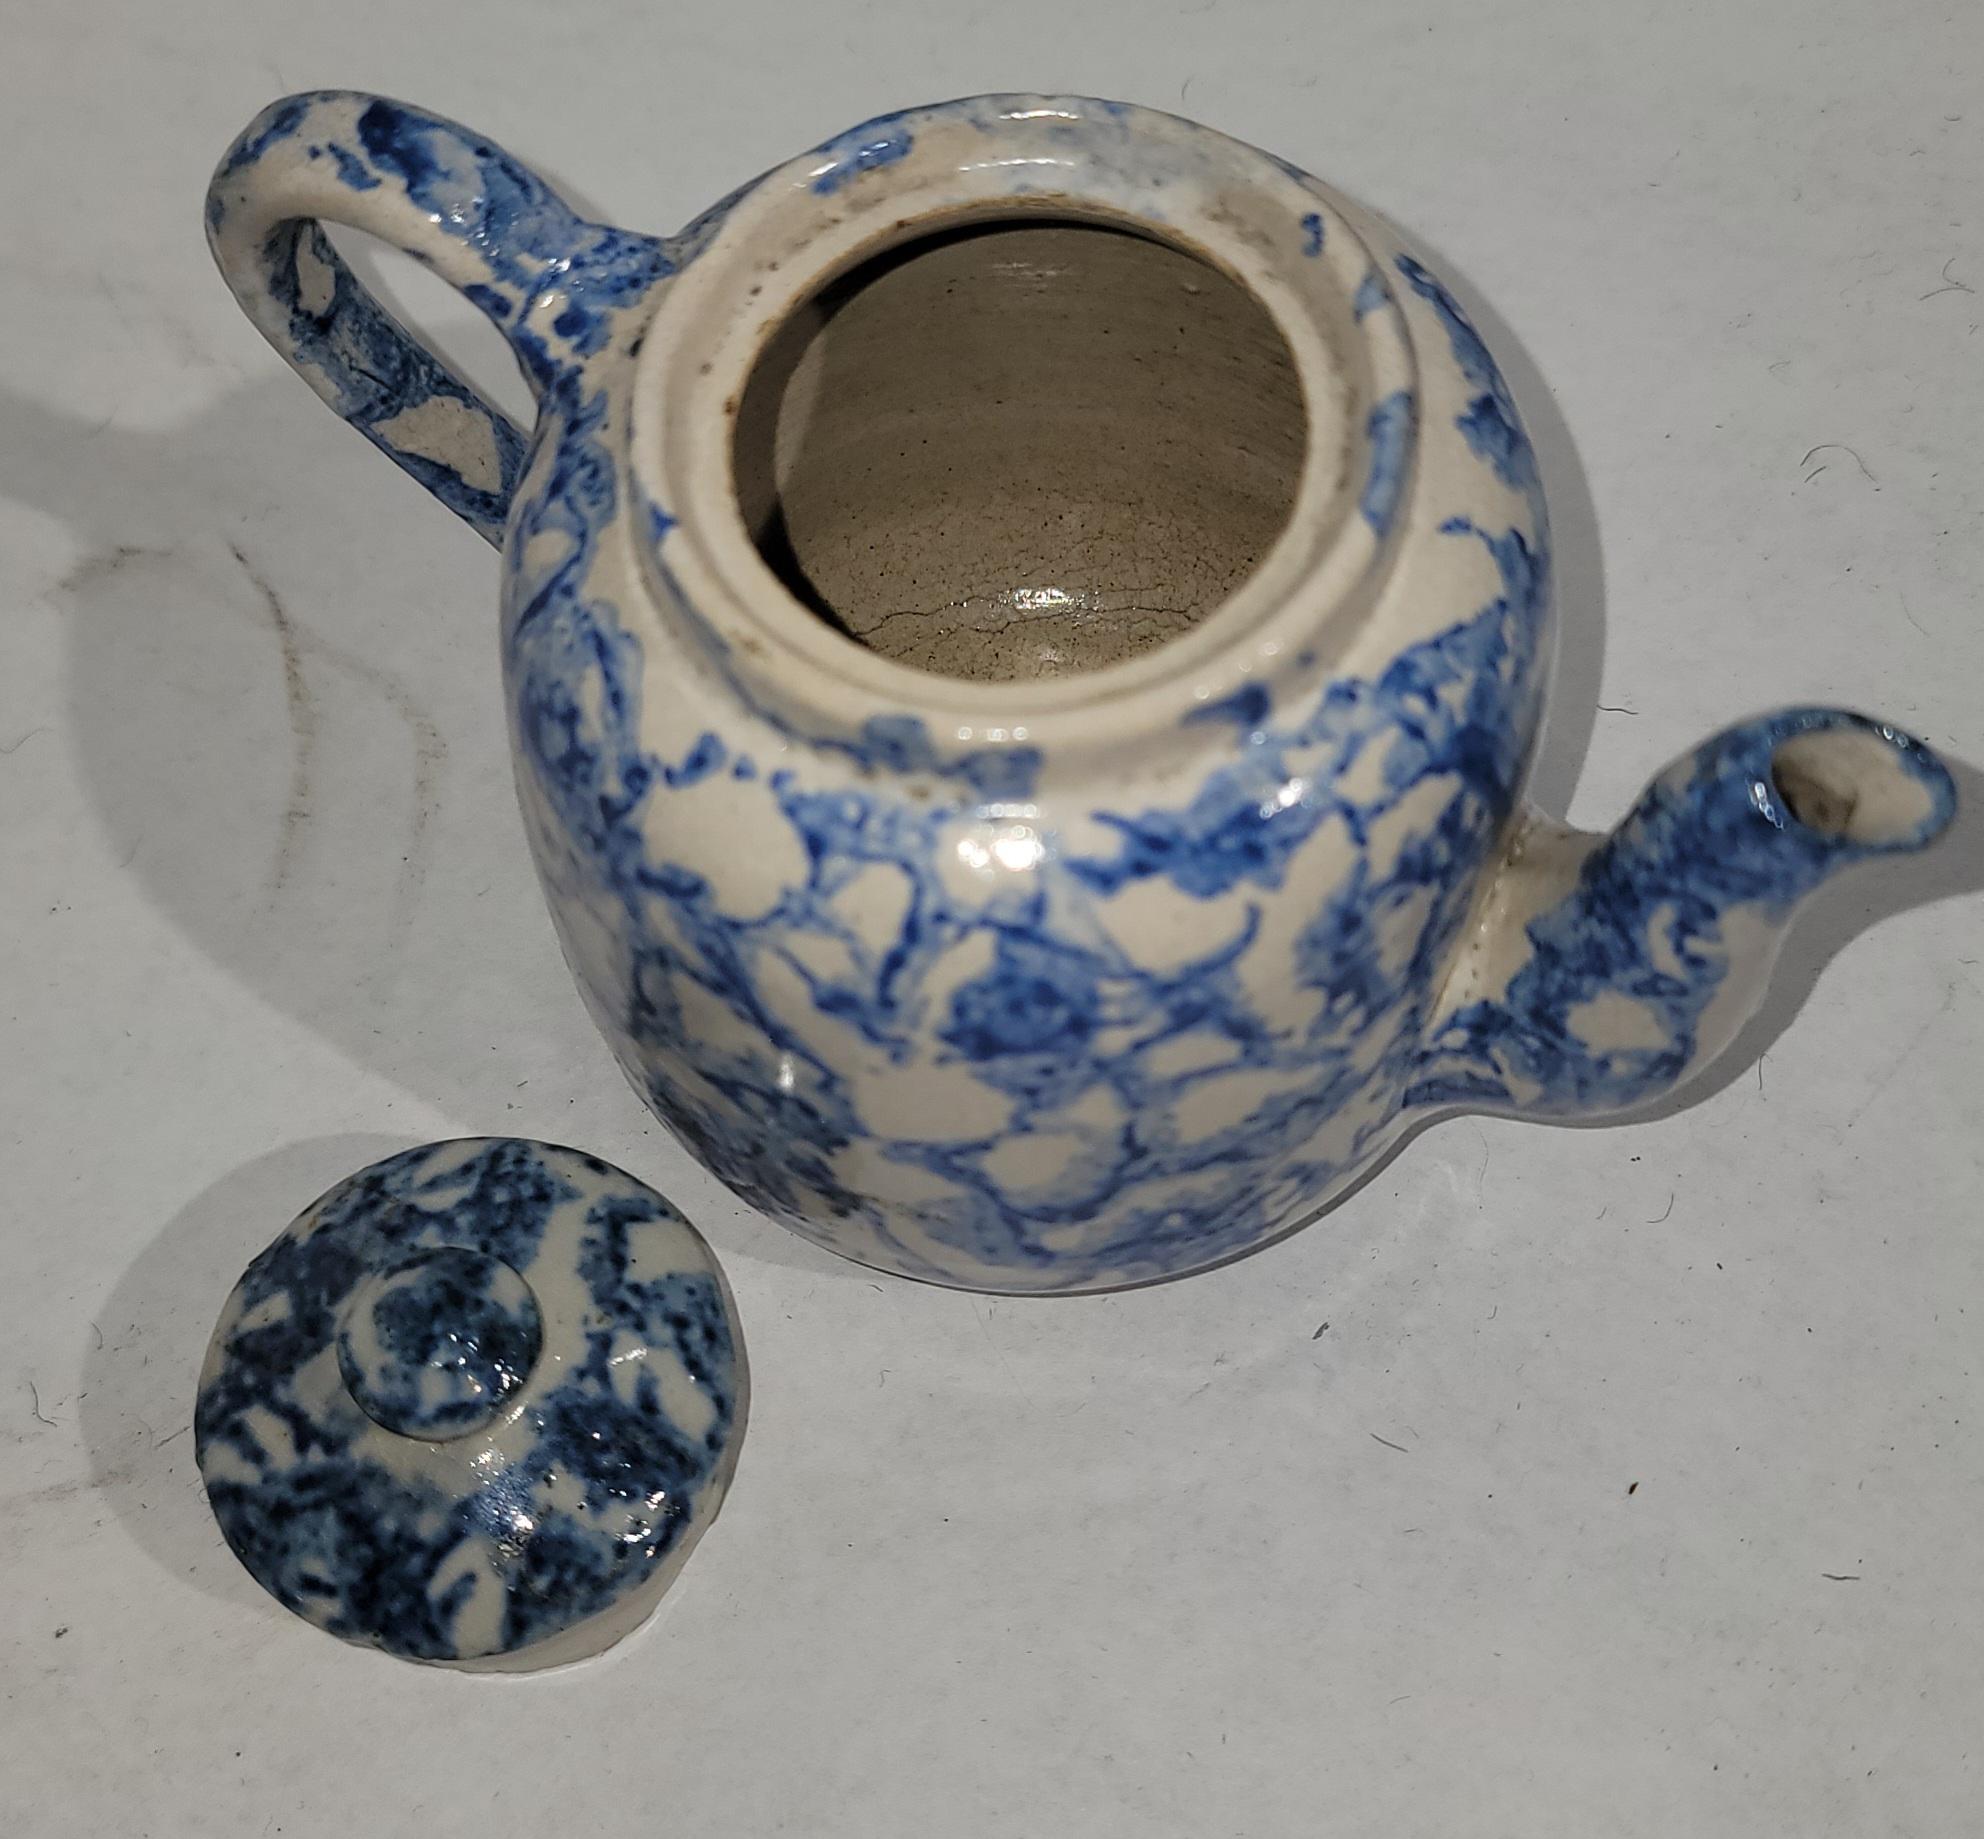 Hand-Crafted 19thc Rare Sponge Ware Miniature Teapot For Sale